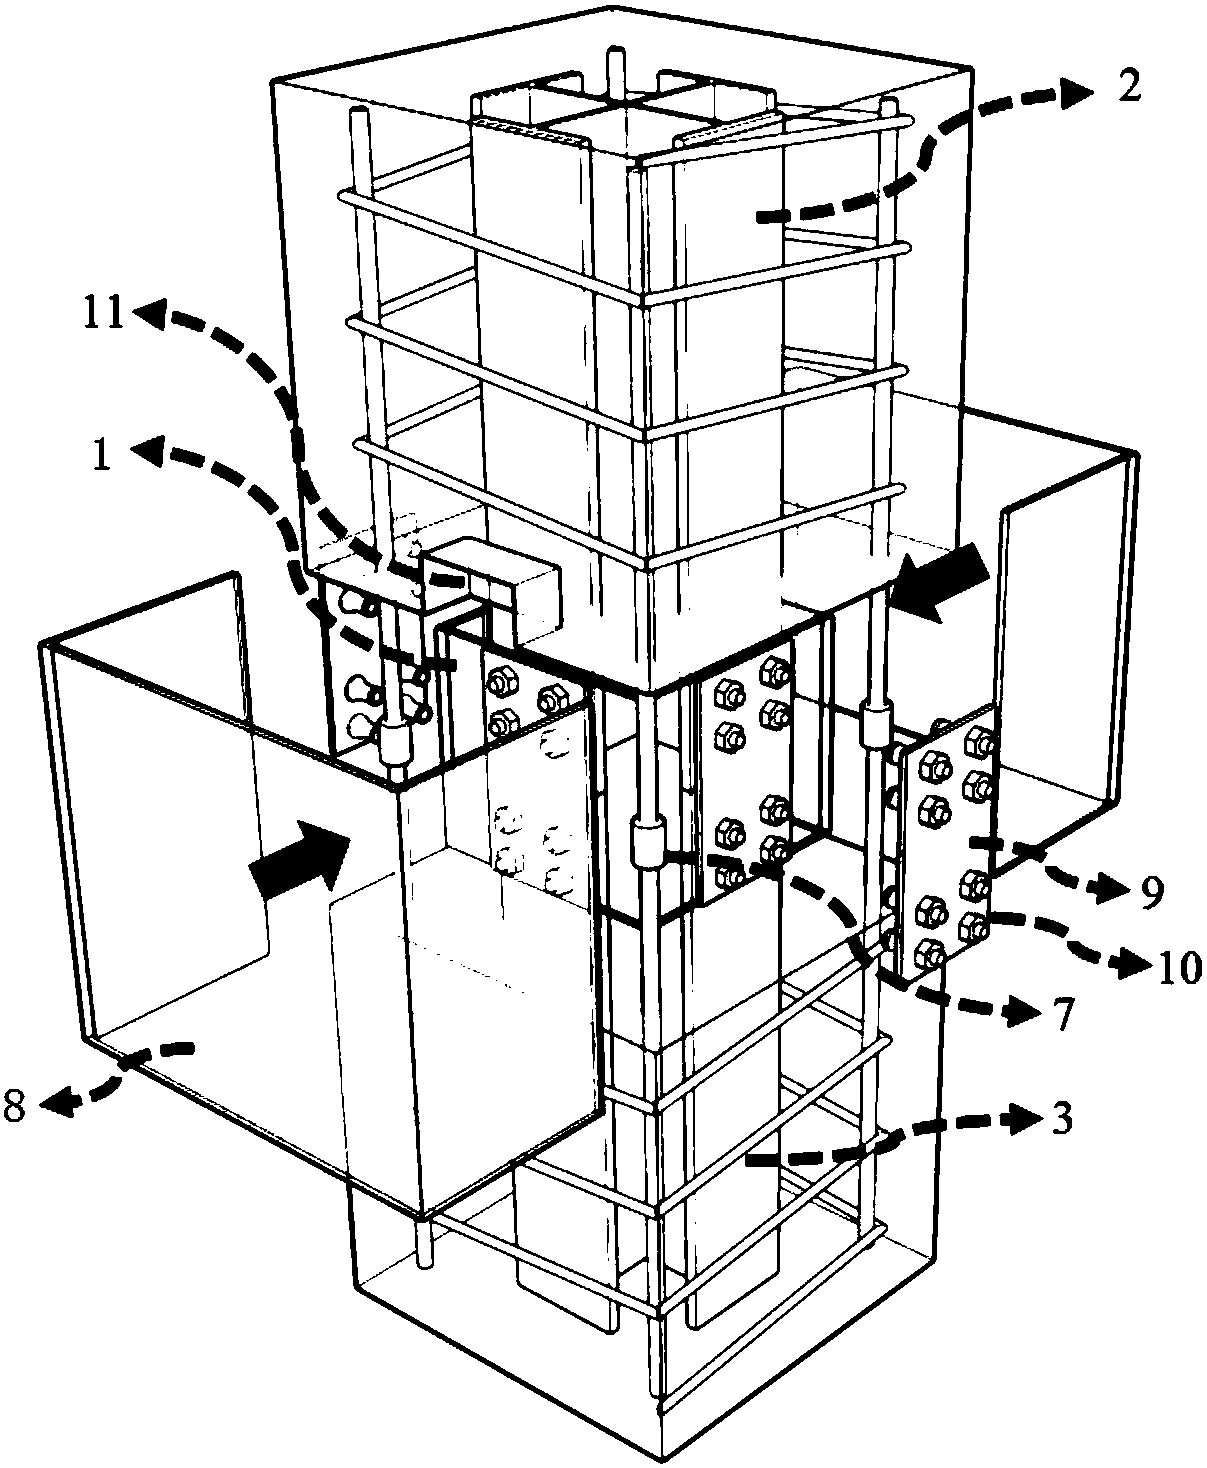 Prefabricated reinforced concrete column connection structure and method